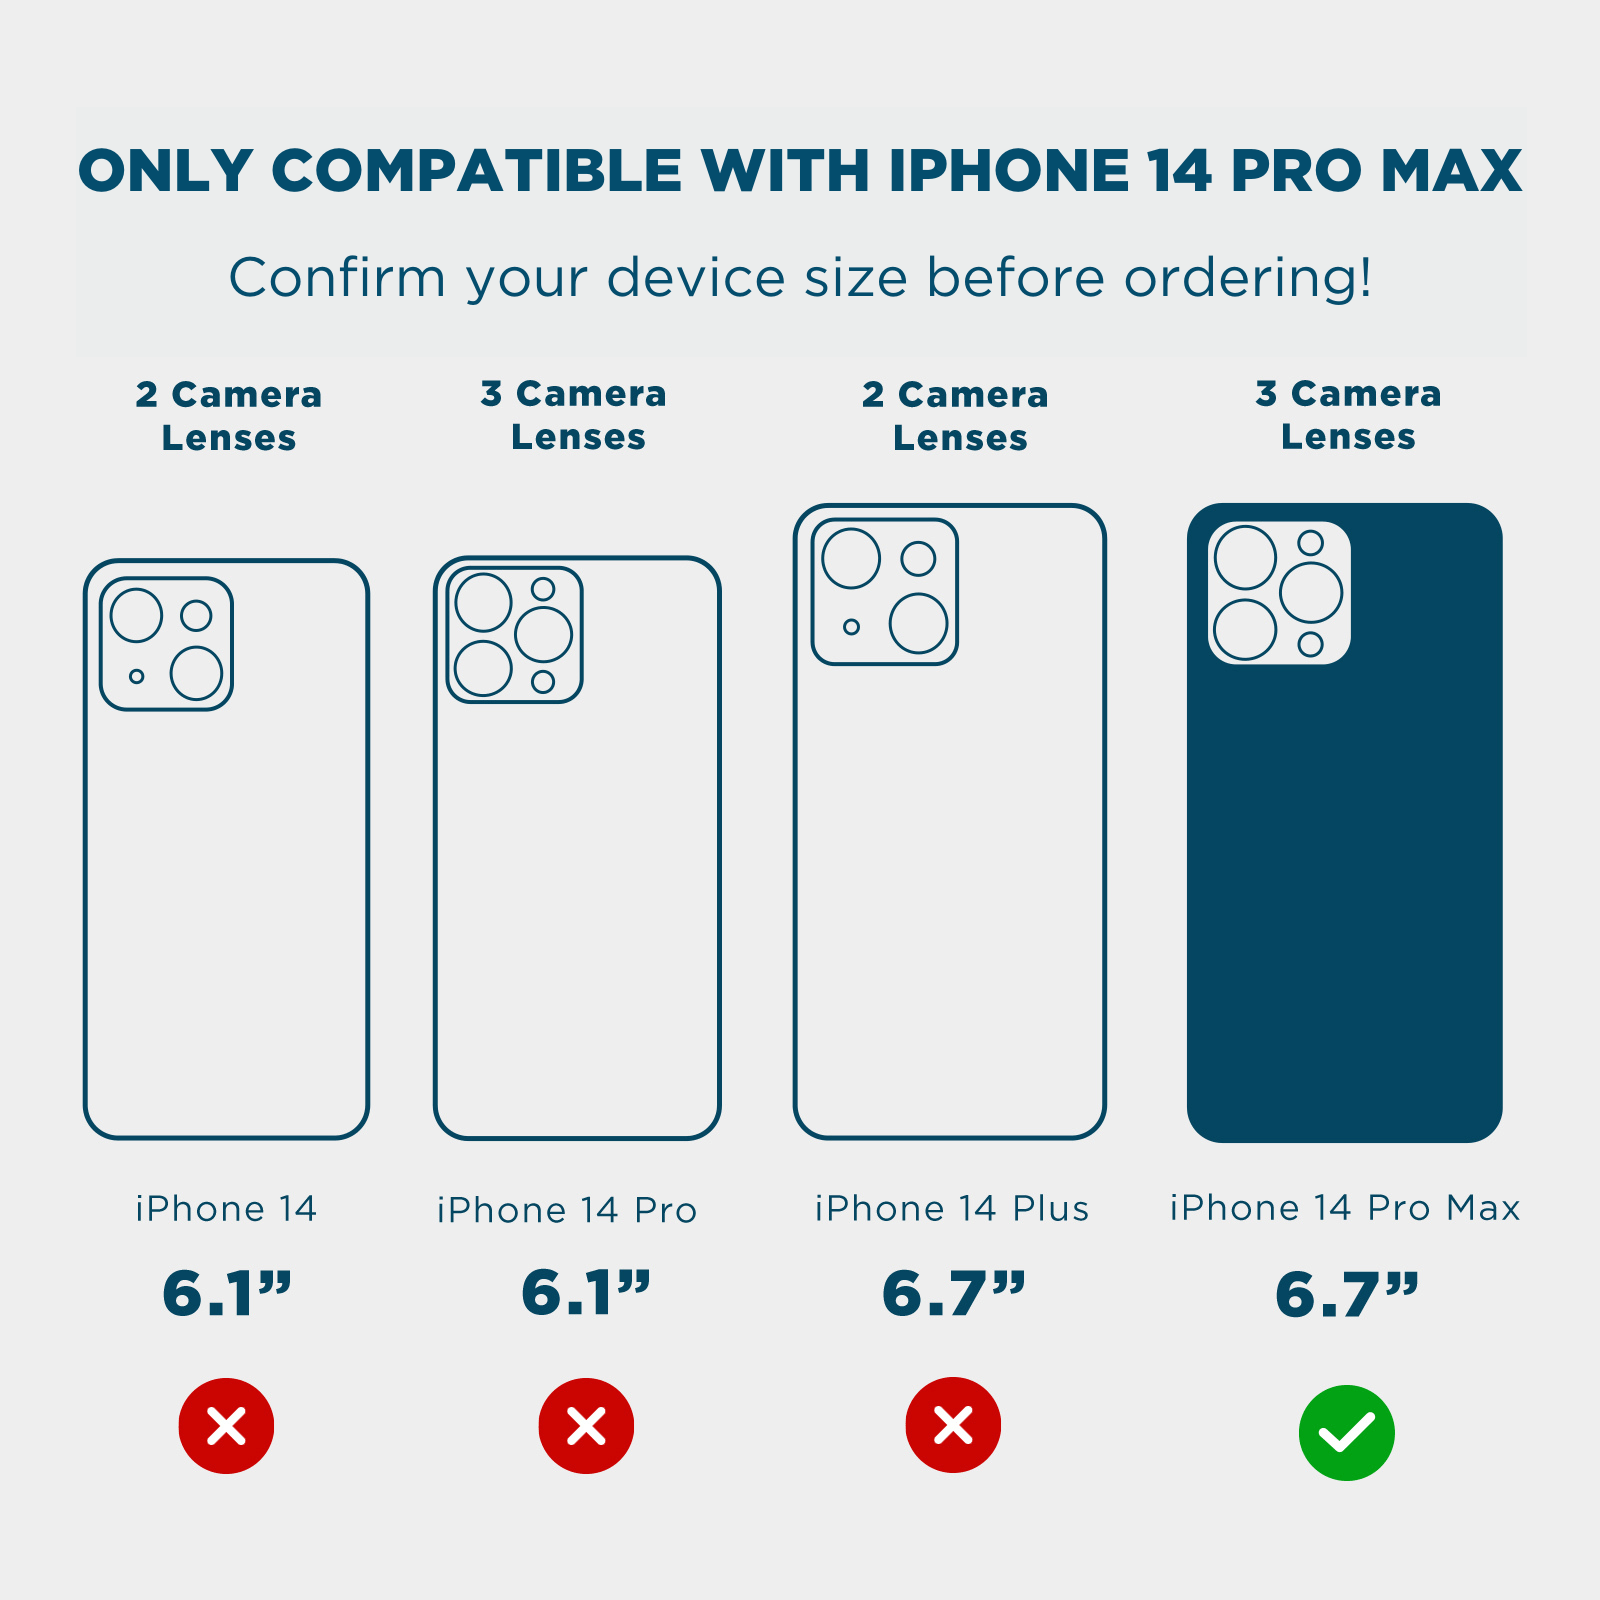 ONLY COMPATIBLE WITH IPHONE 14 PRO MAX. CONFIRM YOUR DEVICE SIZE BEFORE ORDERING. 2 CAMERA LENSES, 3 CAMERA LENSES, 2 CAMERA LENSES, 3 CAMERA LENSES, 6.1, 6.1, 6.7, 6.7. COLOR::GOLD